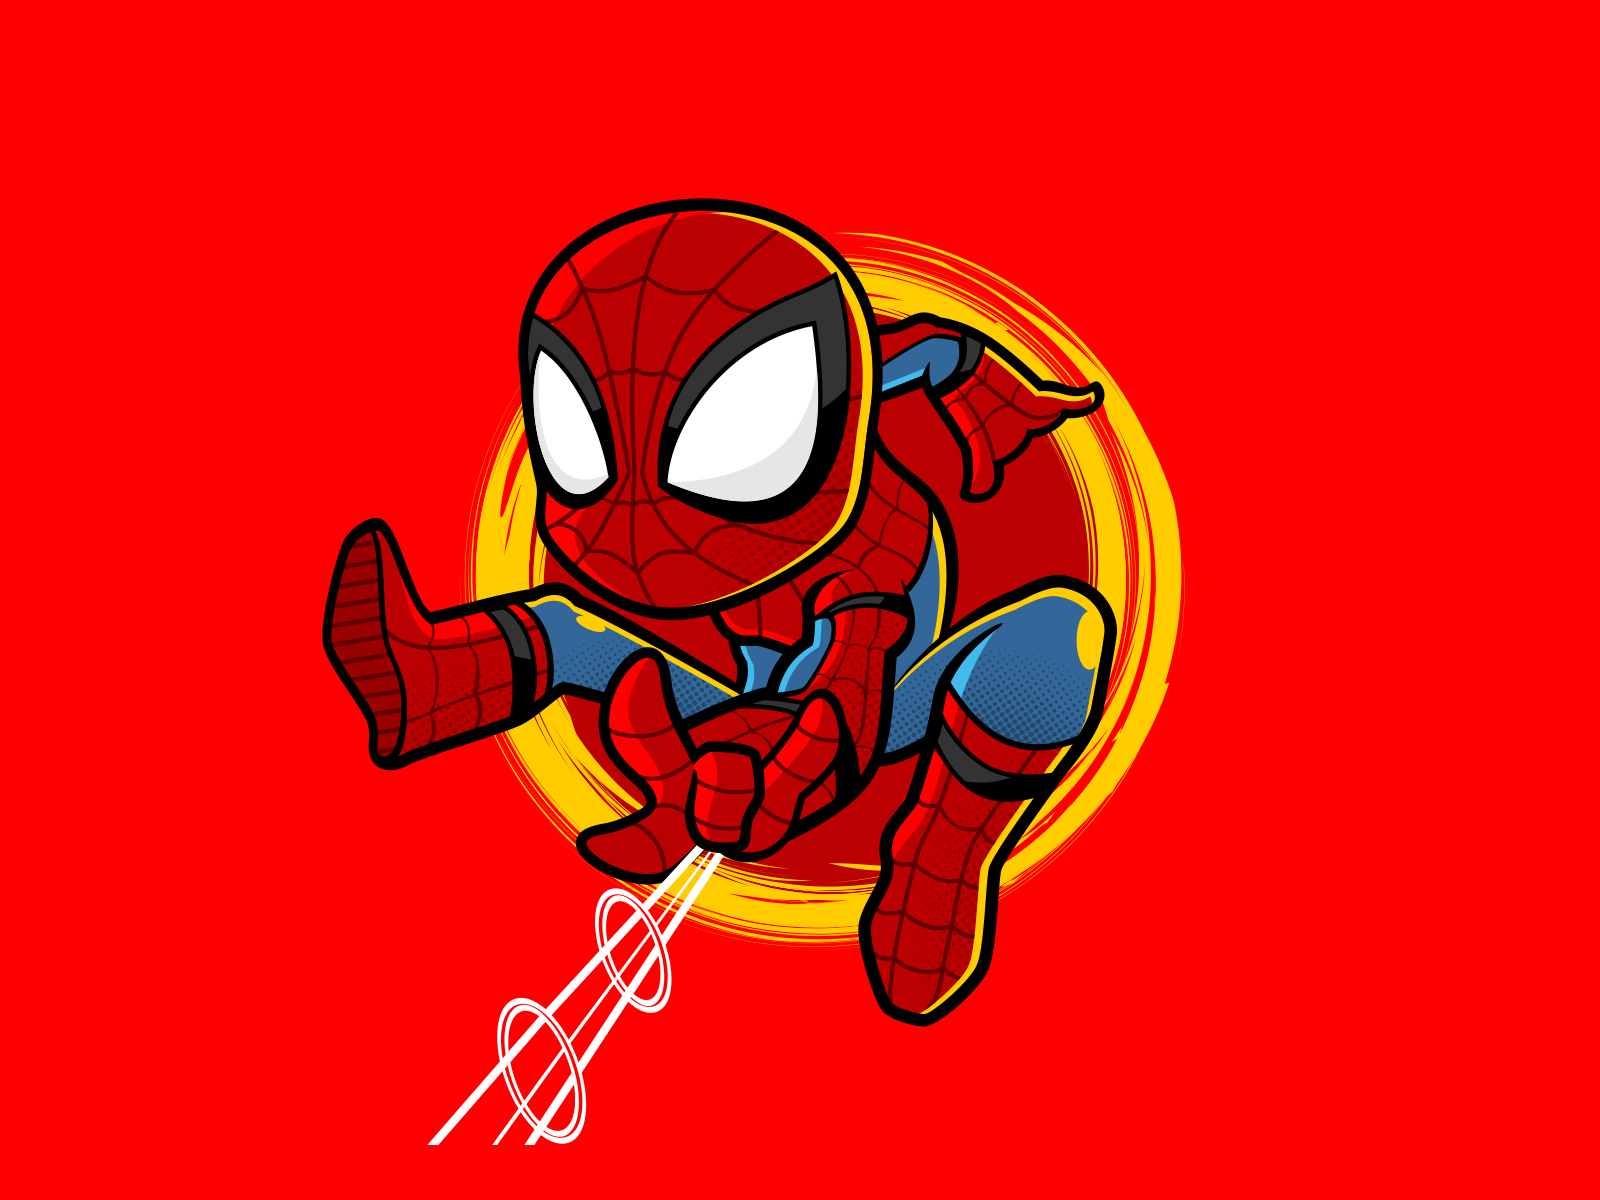 Conceive3D - Chibi-Style Spider-Man